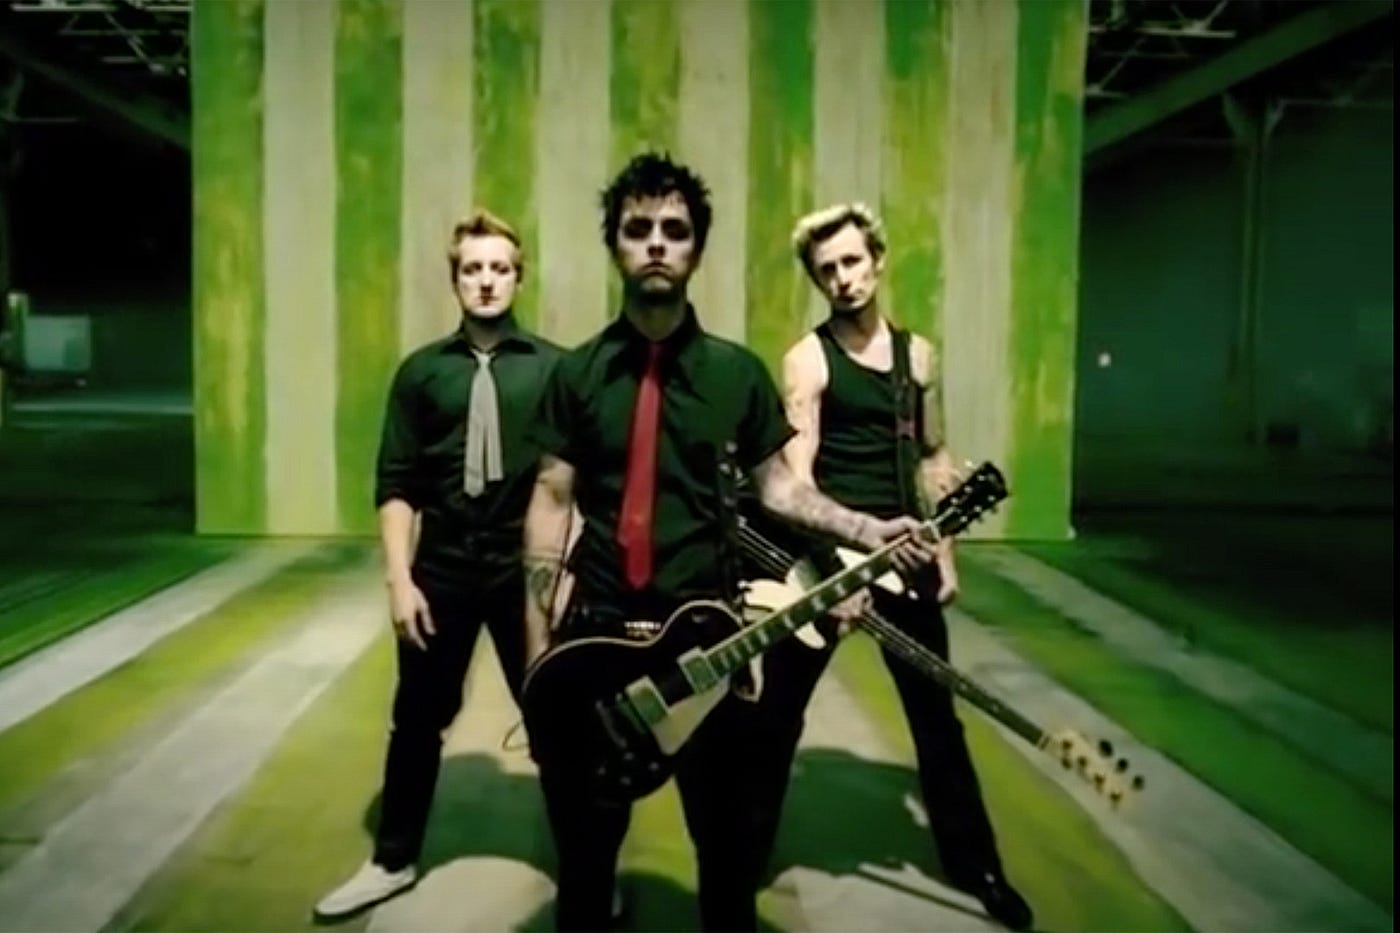 American Idiot': Track 1 of the “American Idiot” Breakdown | by Draven  Copeland | Medium